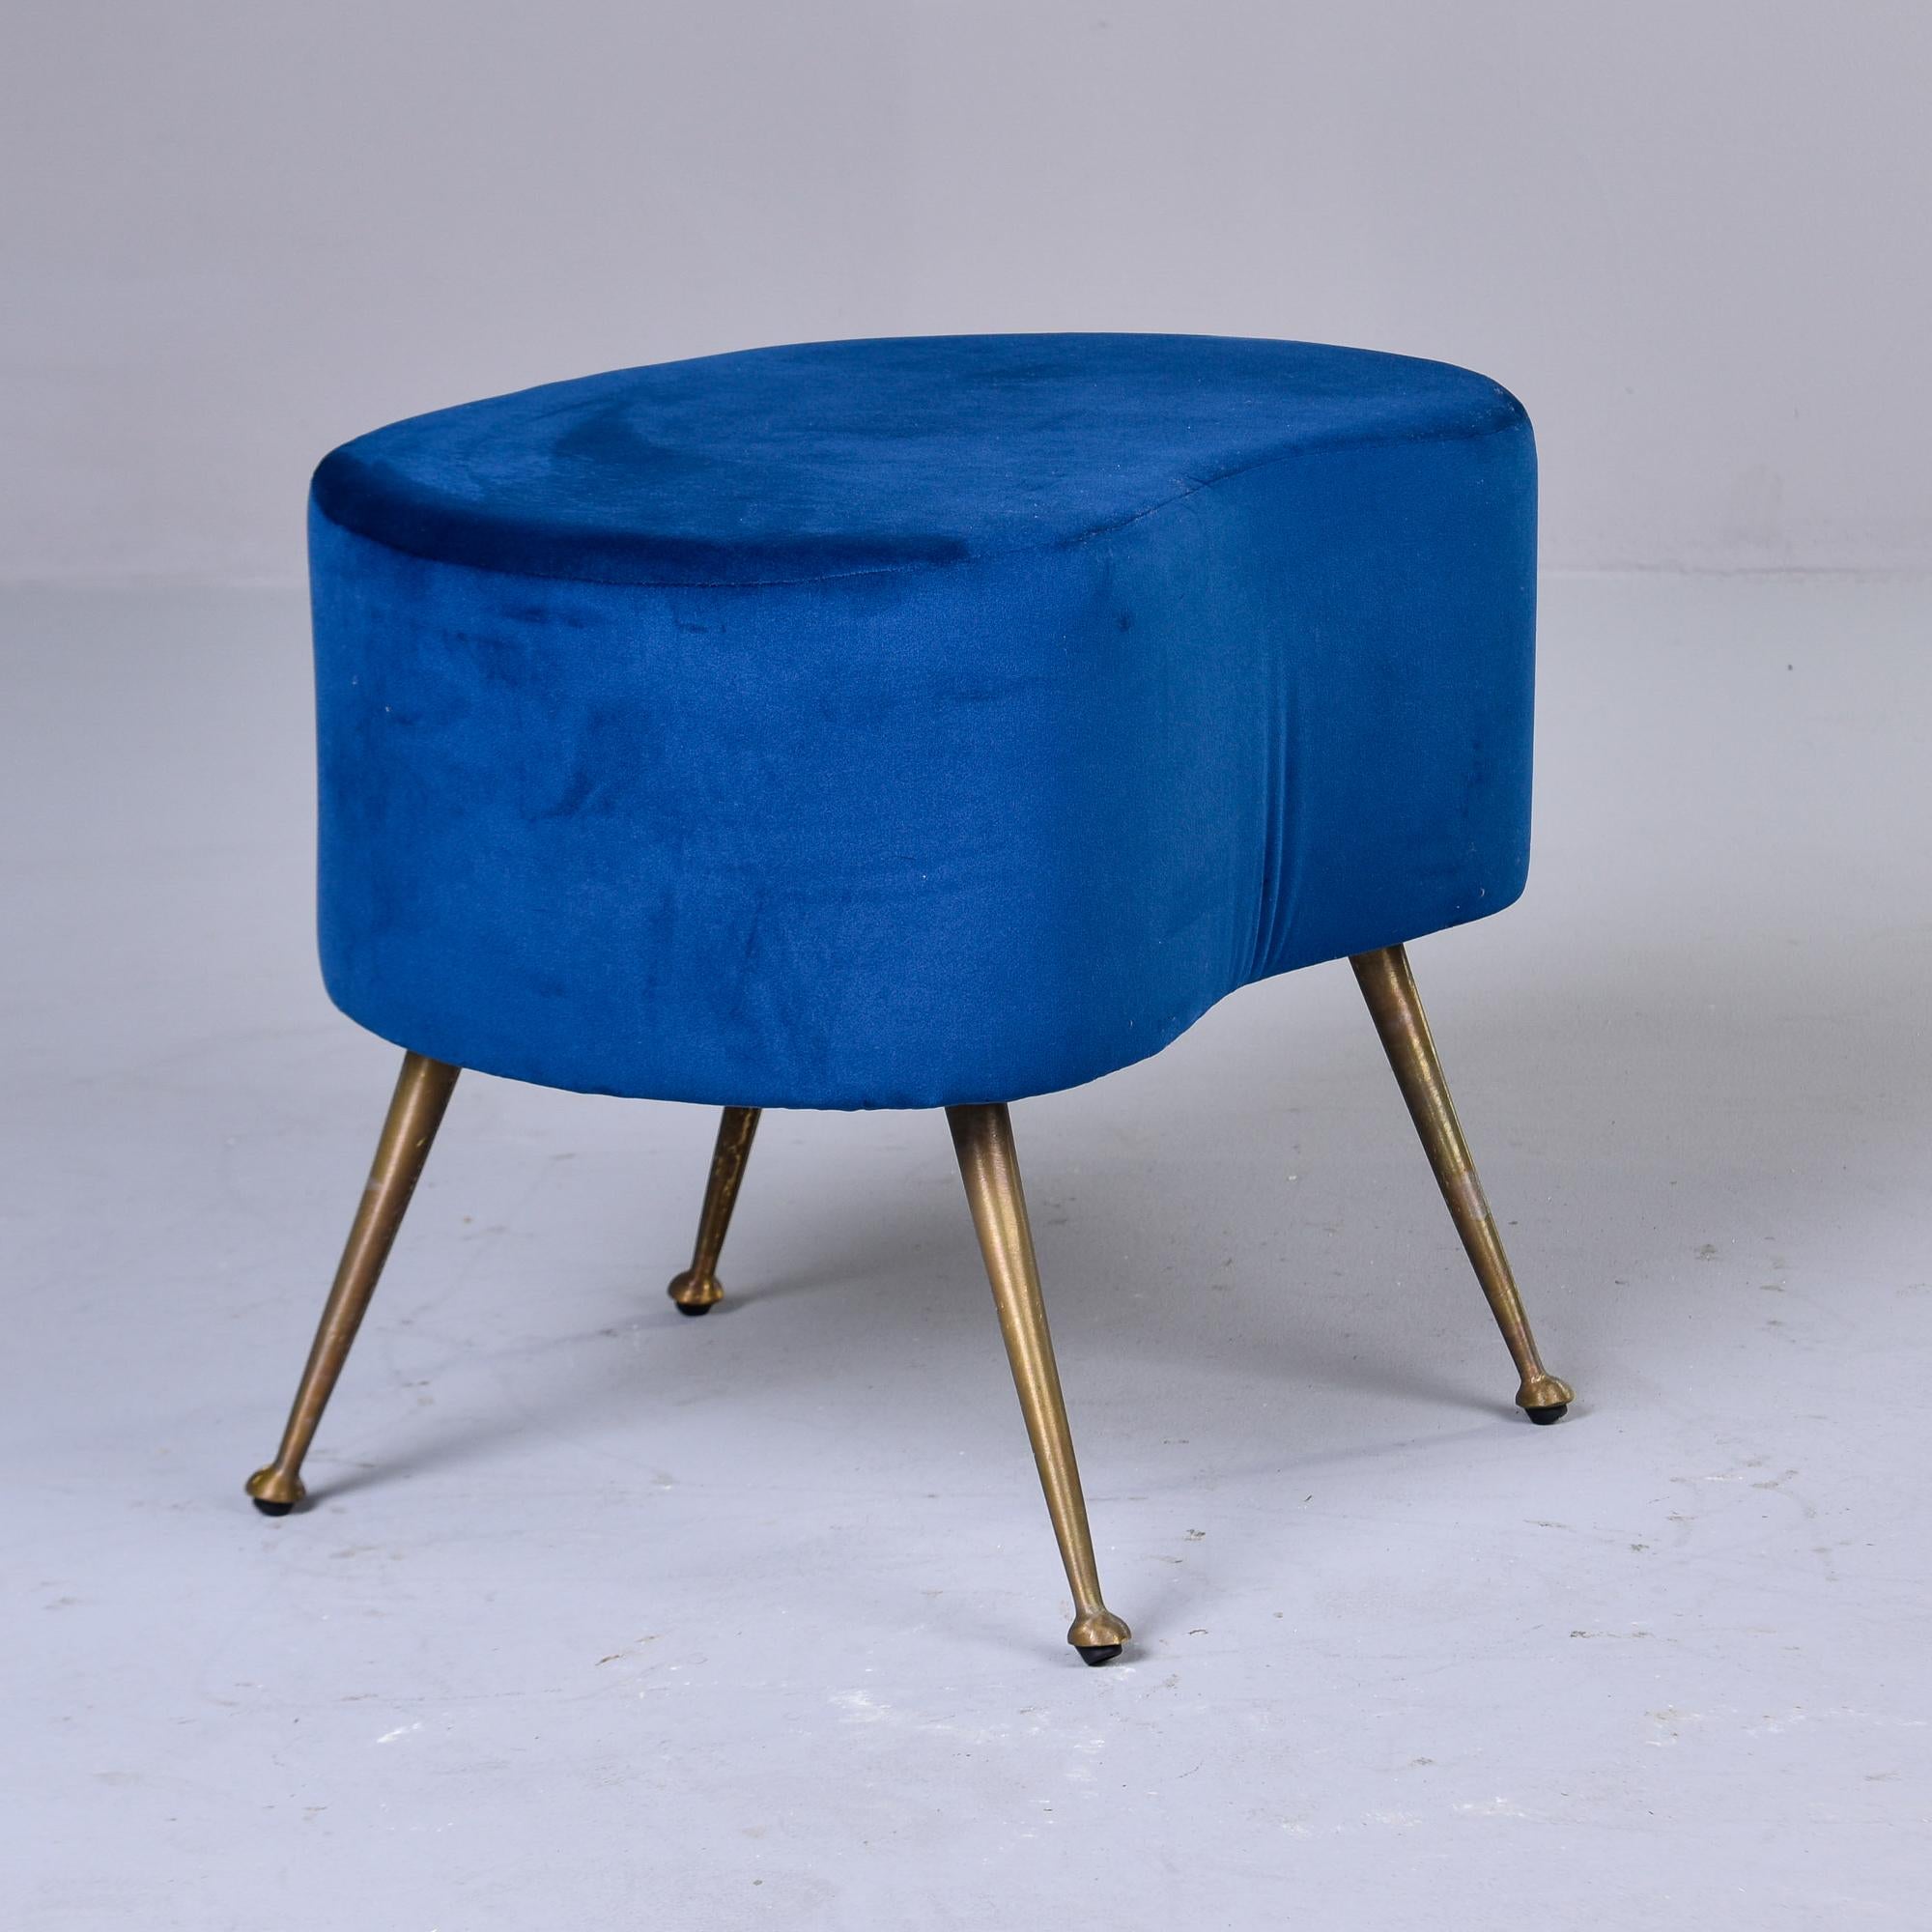 Italian Mid Century Blue Kidney Shaped Stool with Brass Legs For Sale 3